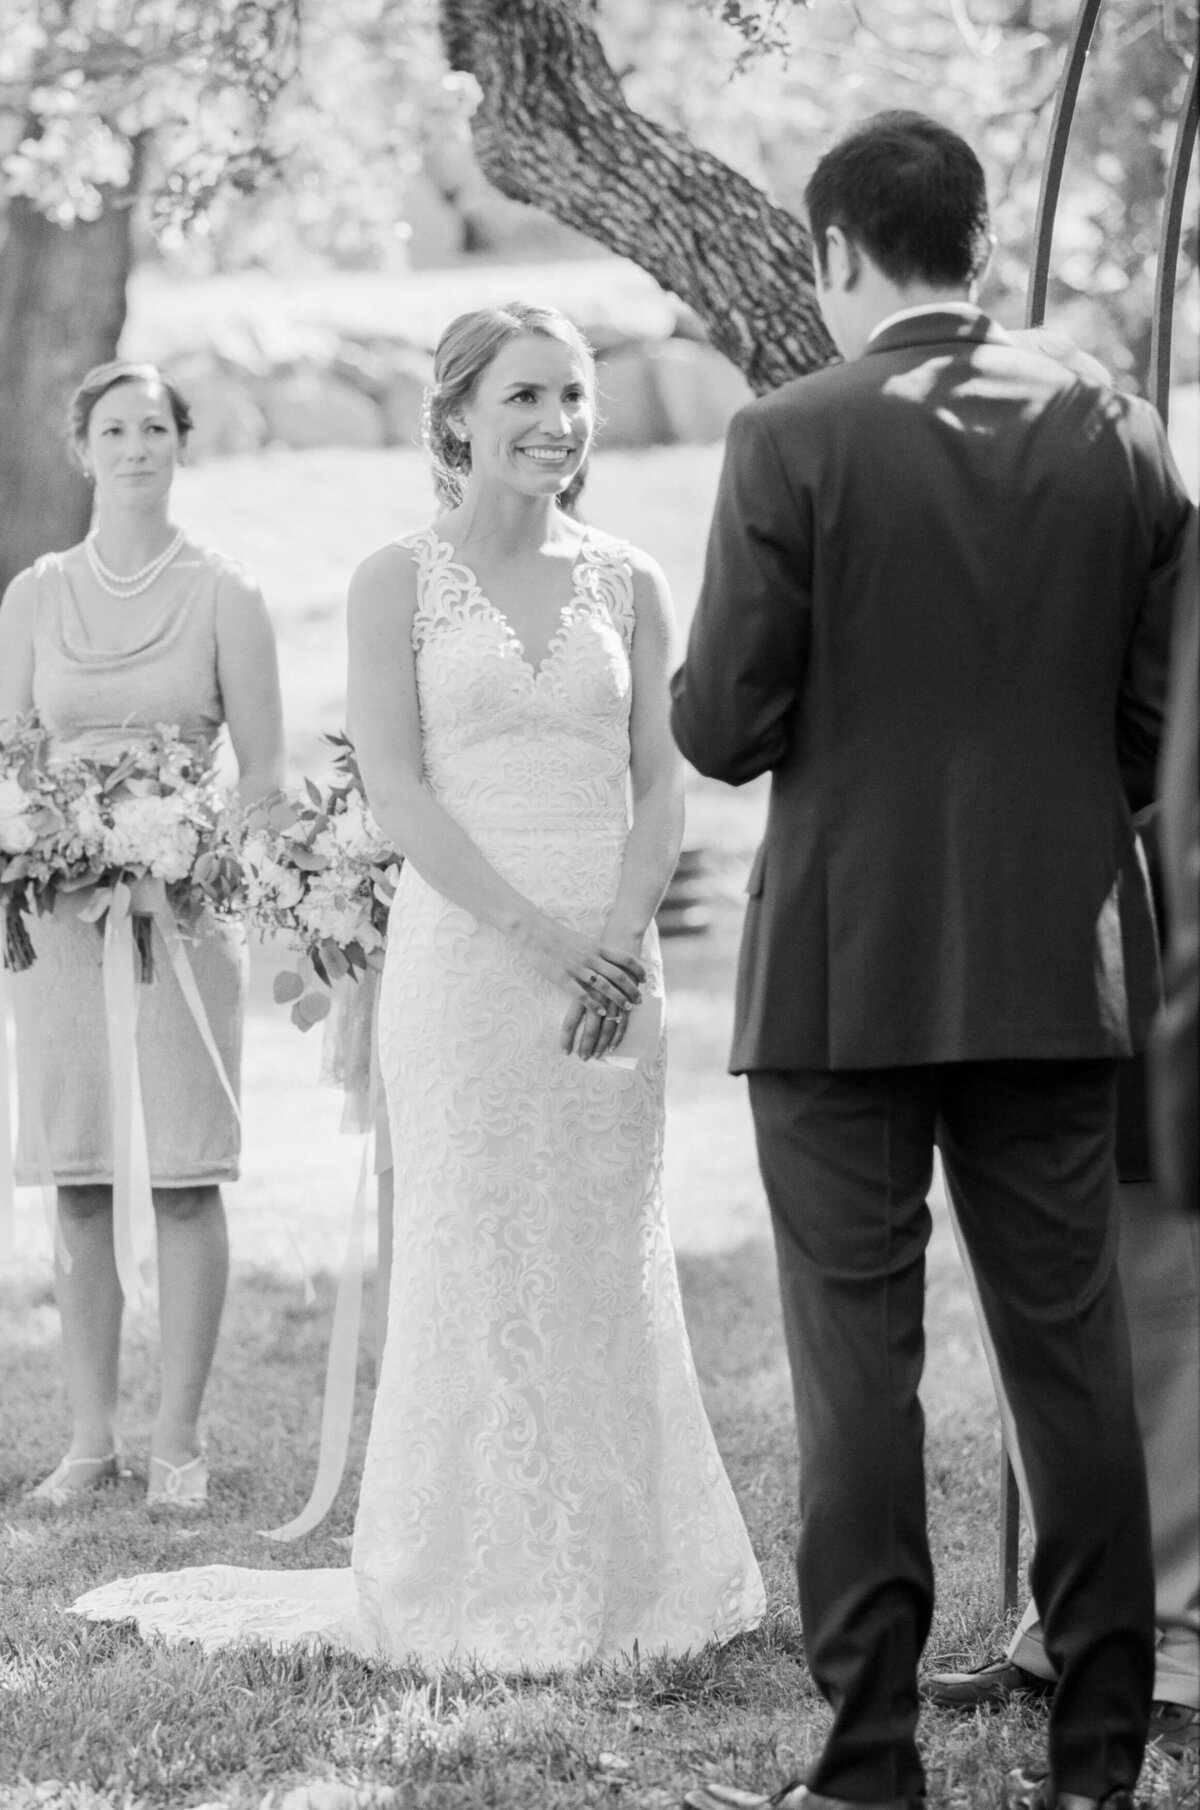 Bride looks at her husband-to-be as he reads his vows.